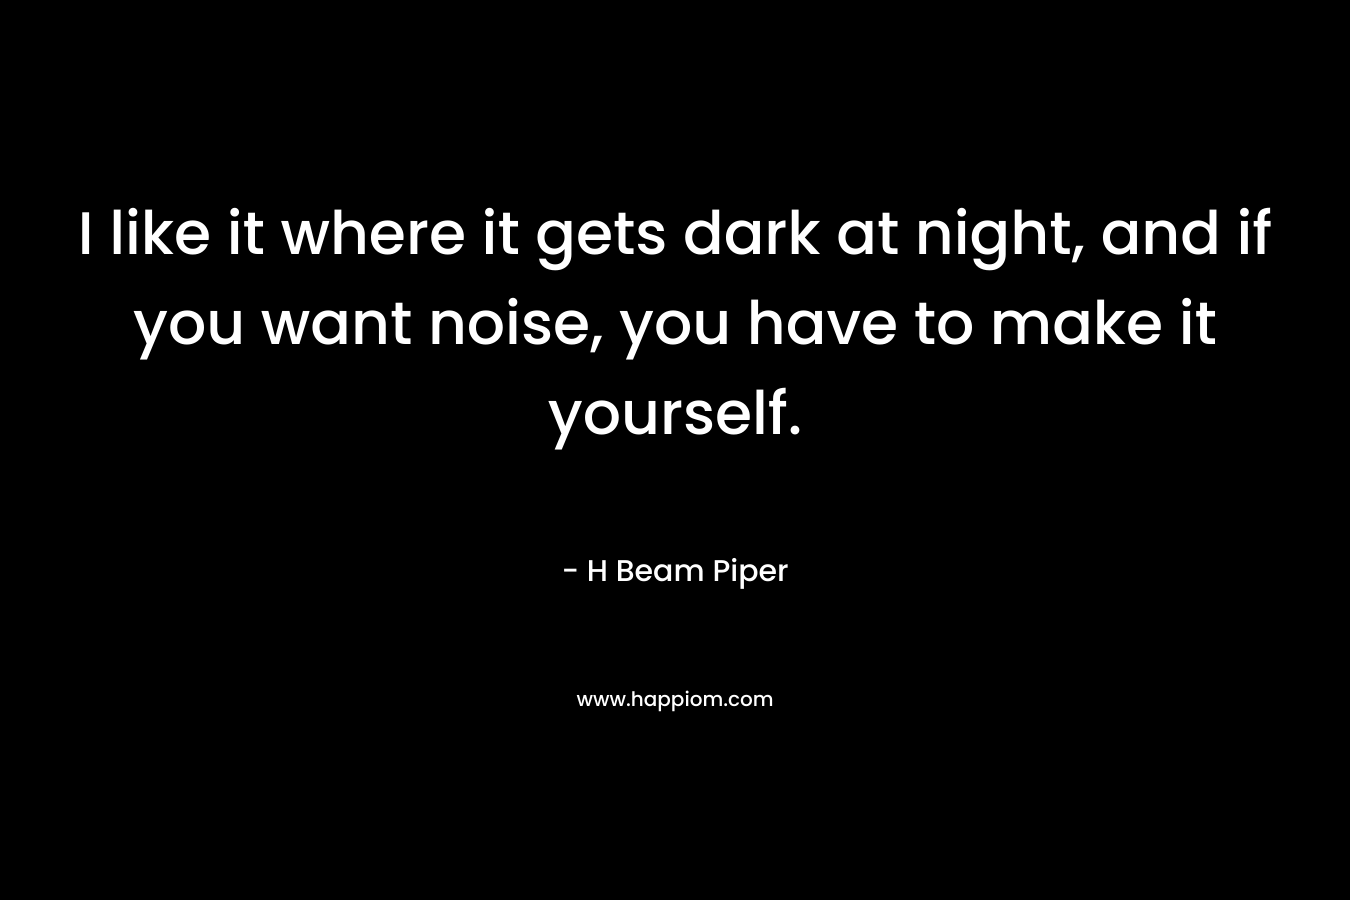 I like it where it gets dark at night, and if you want noise, you have to make it yourself.